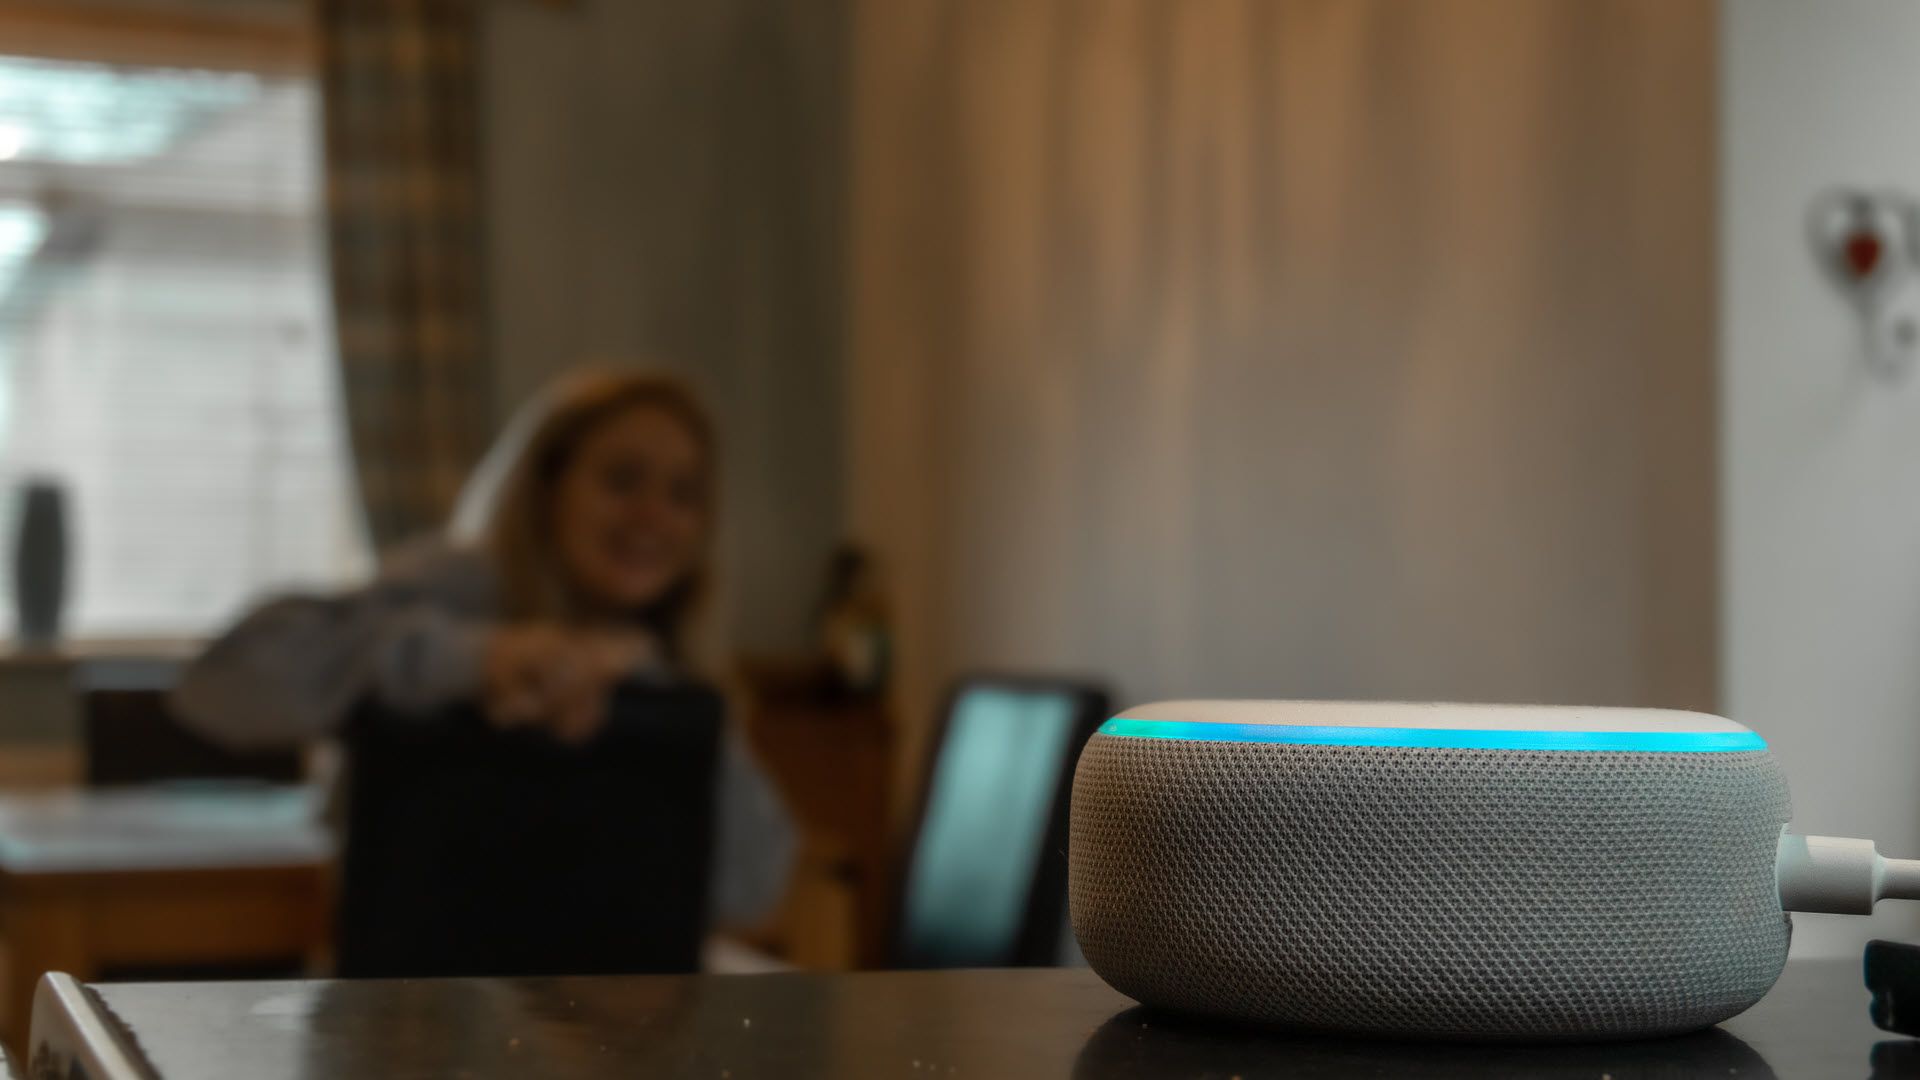 A woman talking to an Amazon Echo dot while frowning.